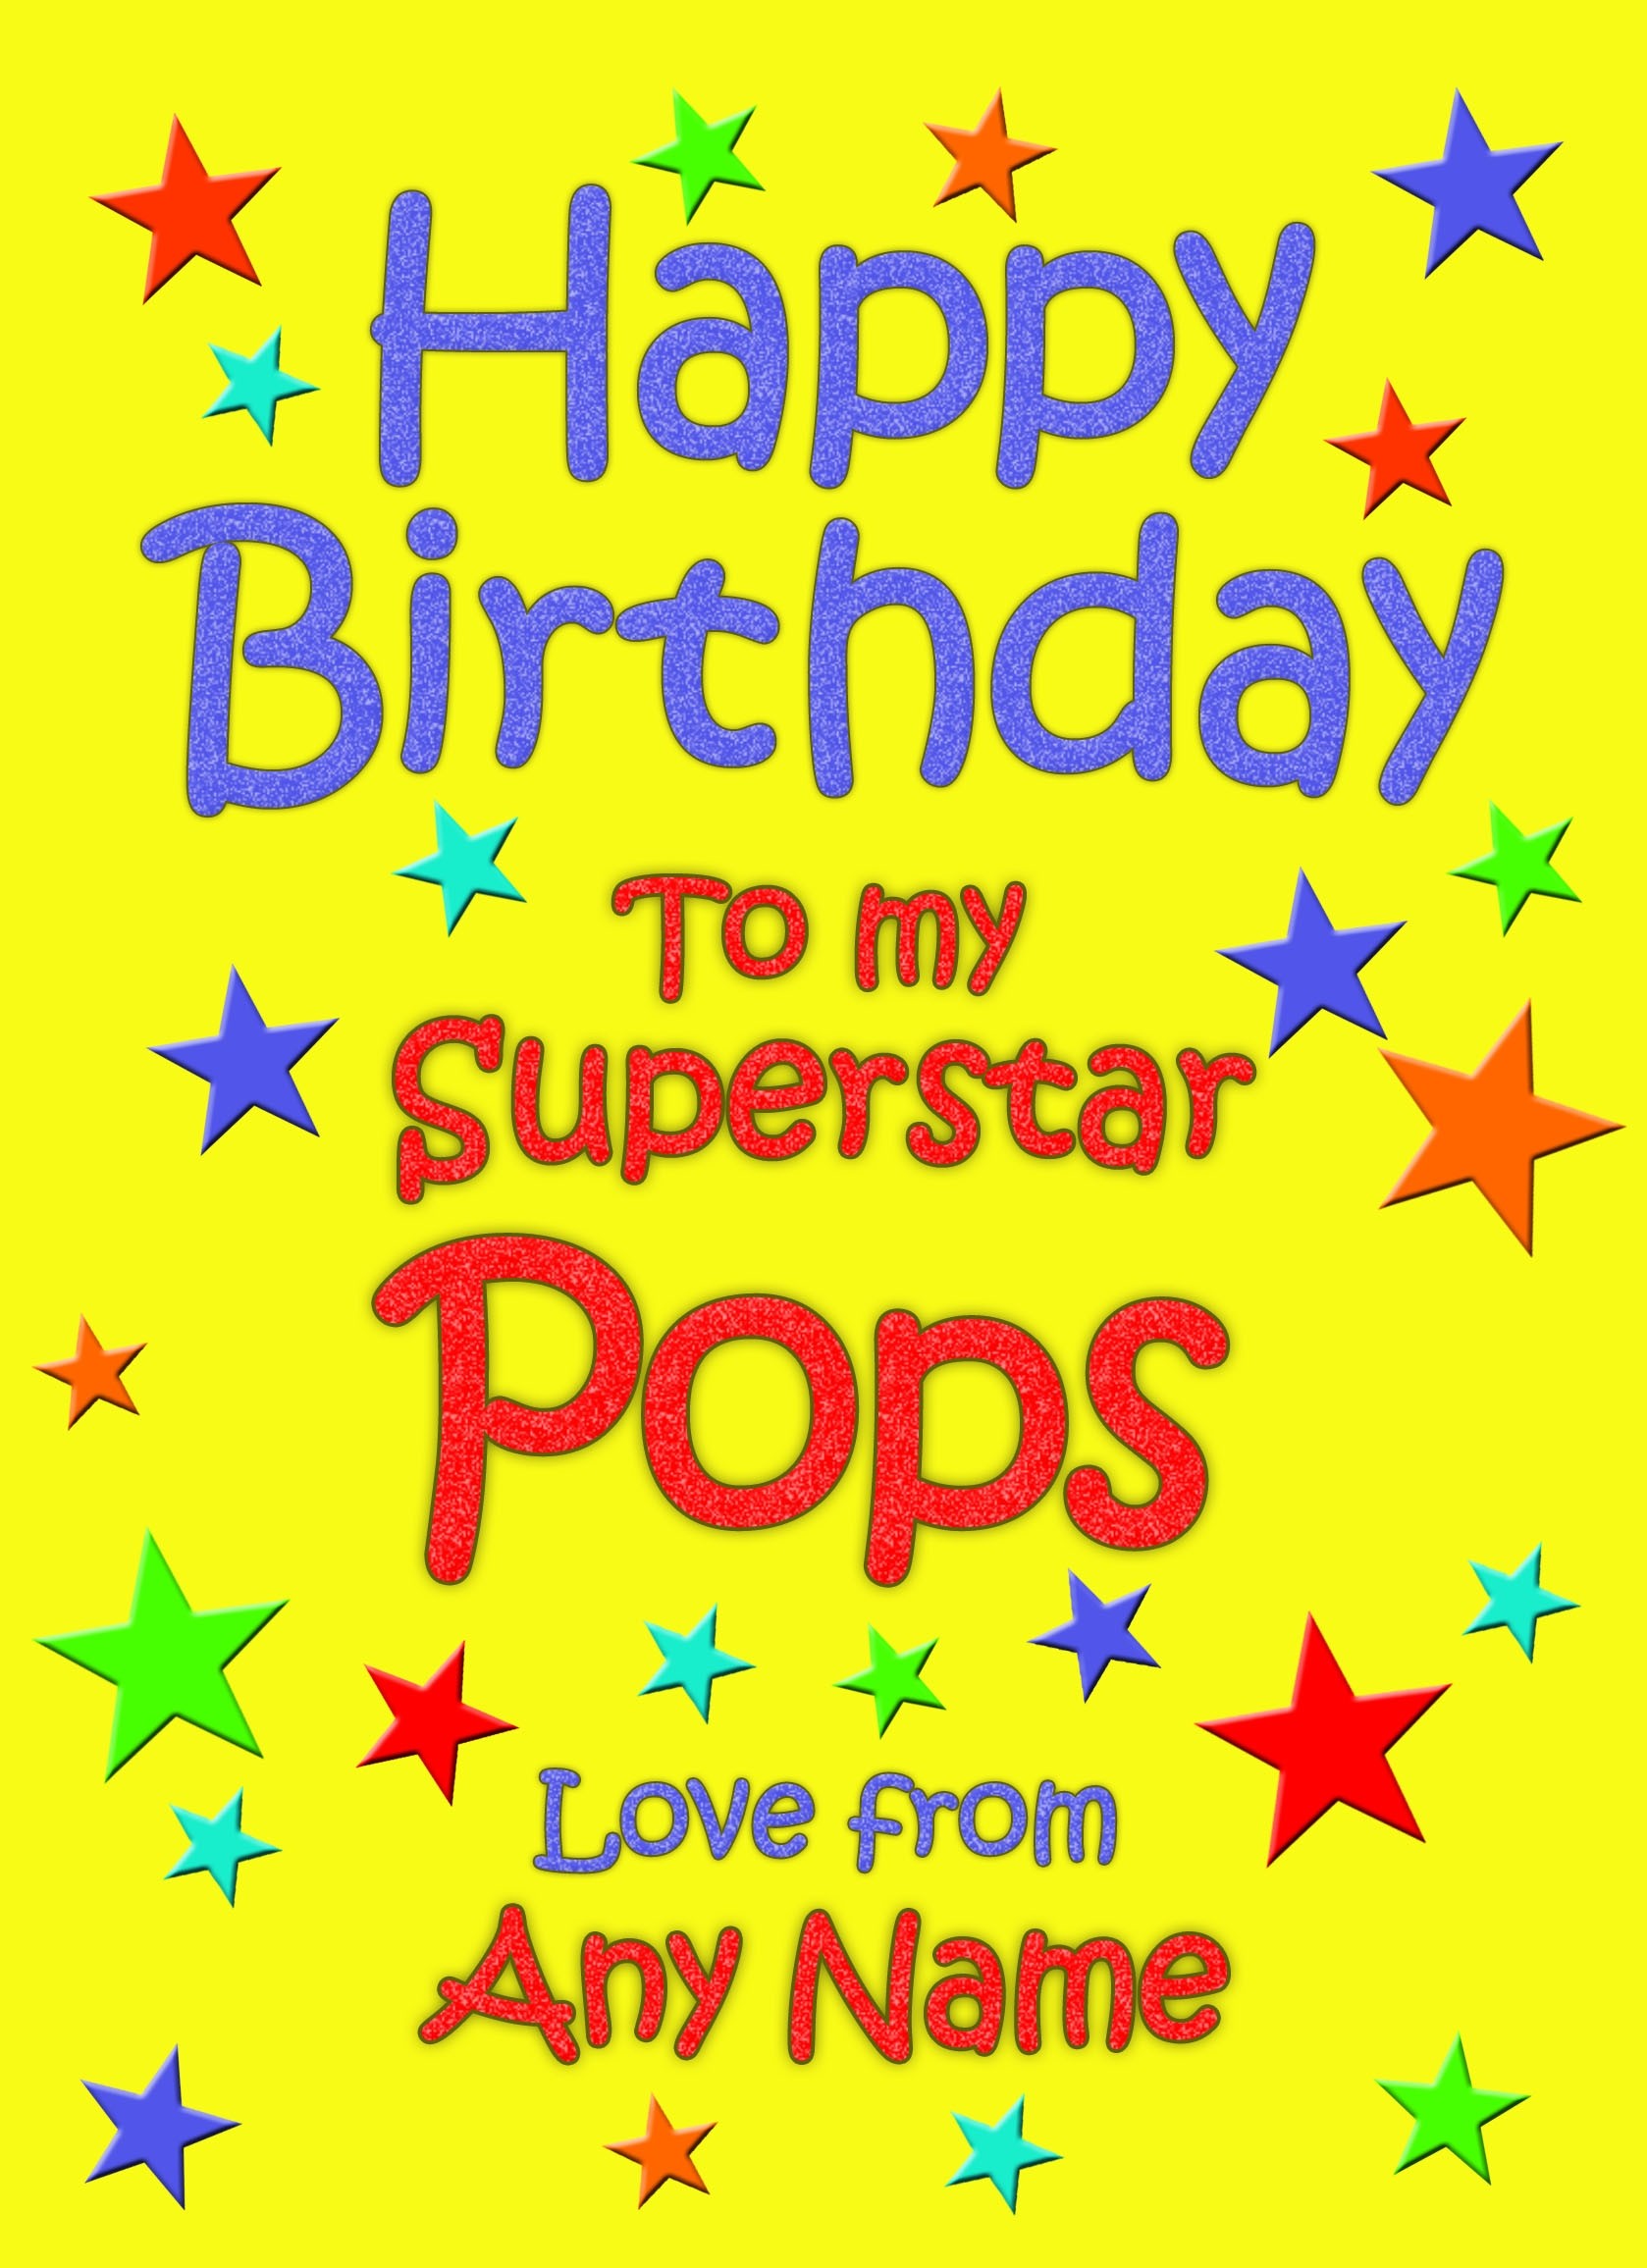 Personalised Pops Birthday Card (Yellow)